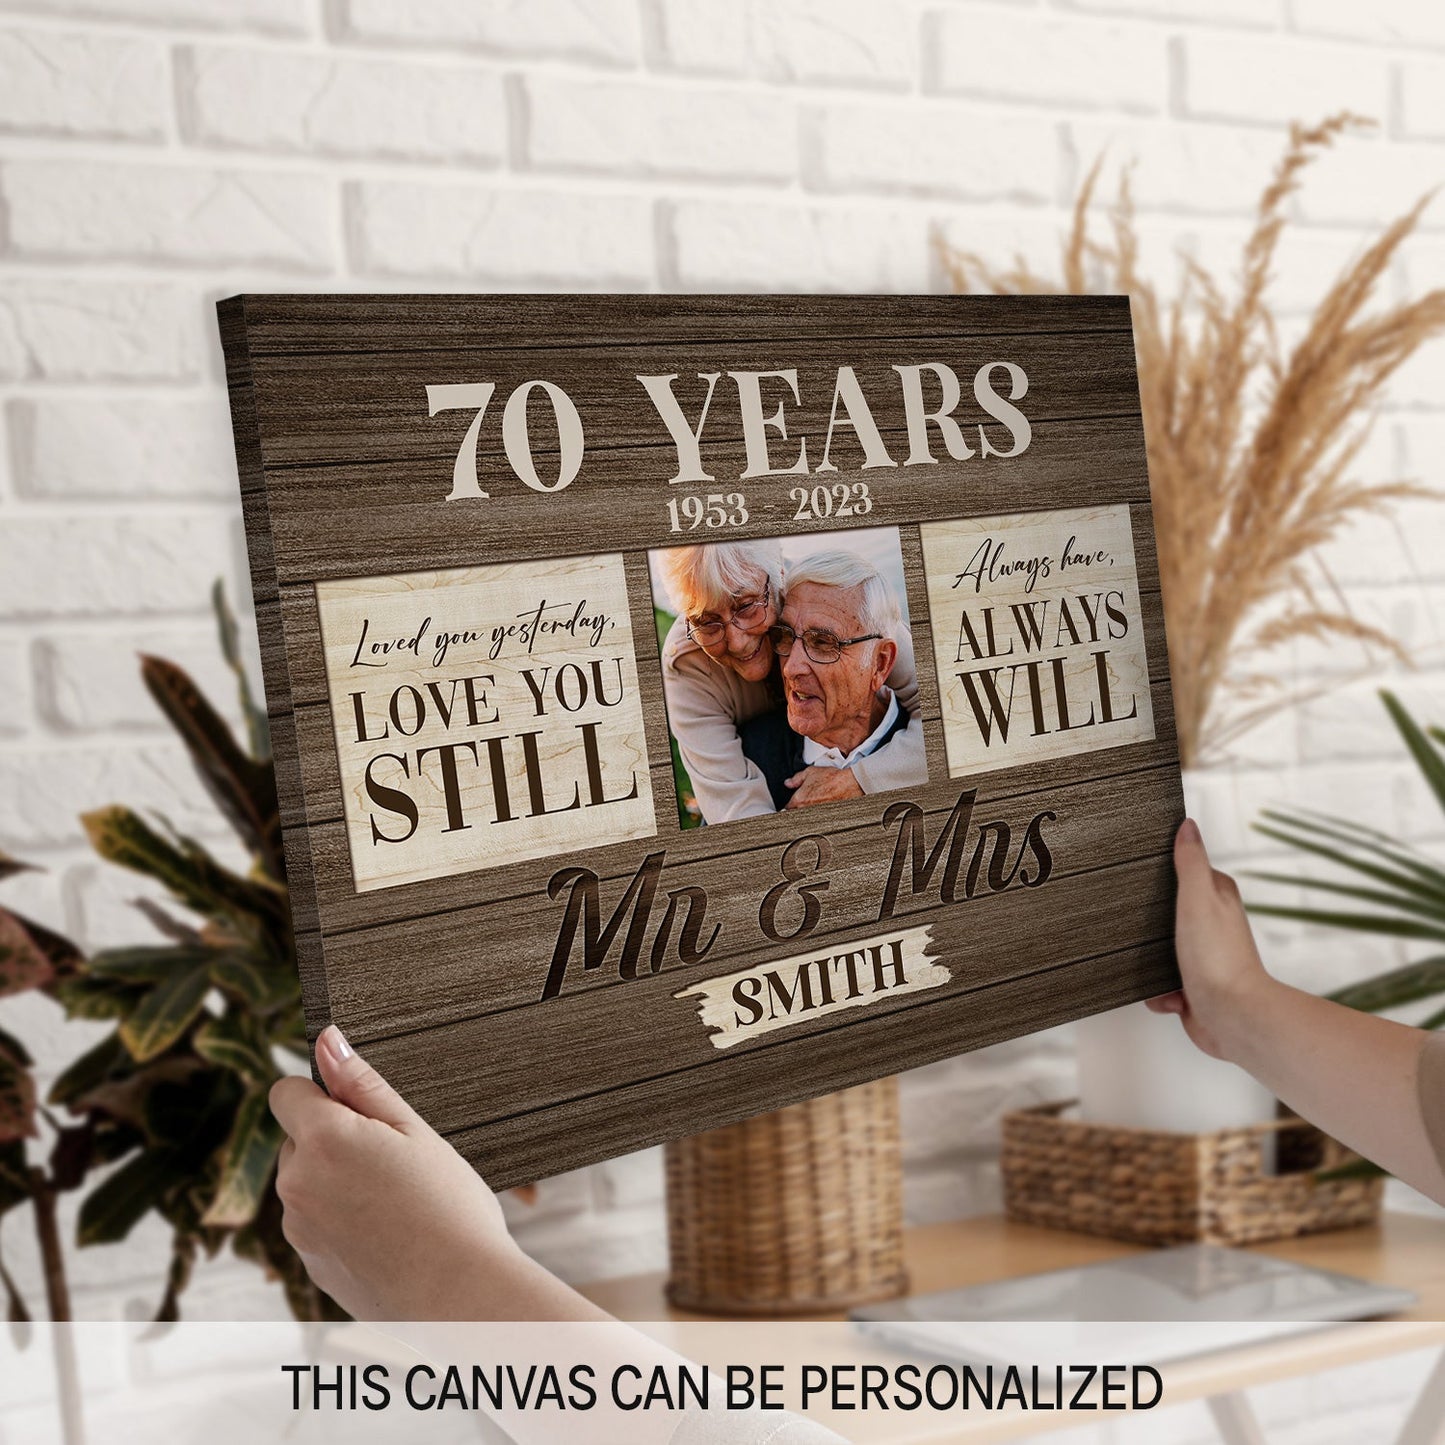 70 Years Mr. & Mrs. - Personalized 70 Year Anniversary gift for Parents, Husband or Wife - Custom Canvas Print - MyMindfulGifts